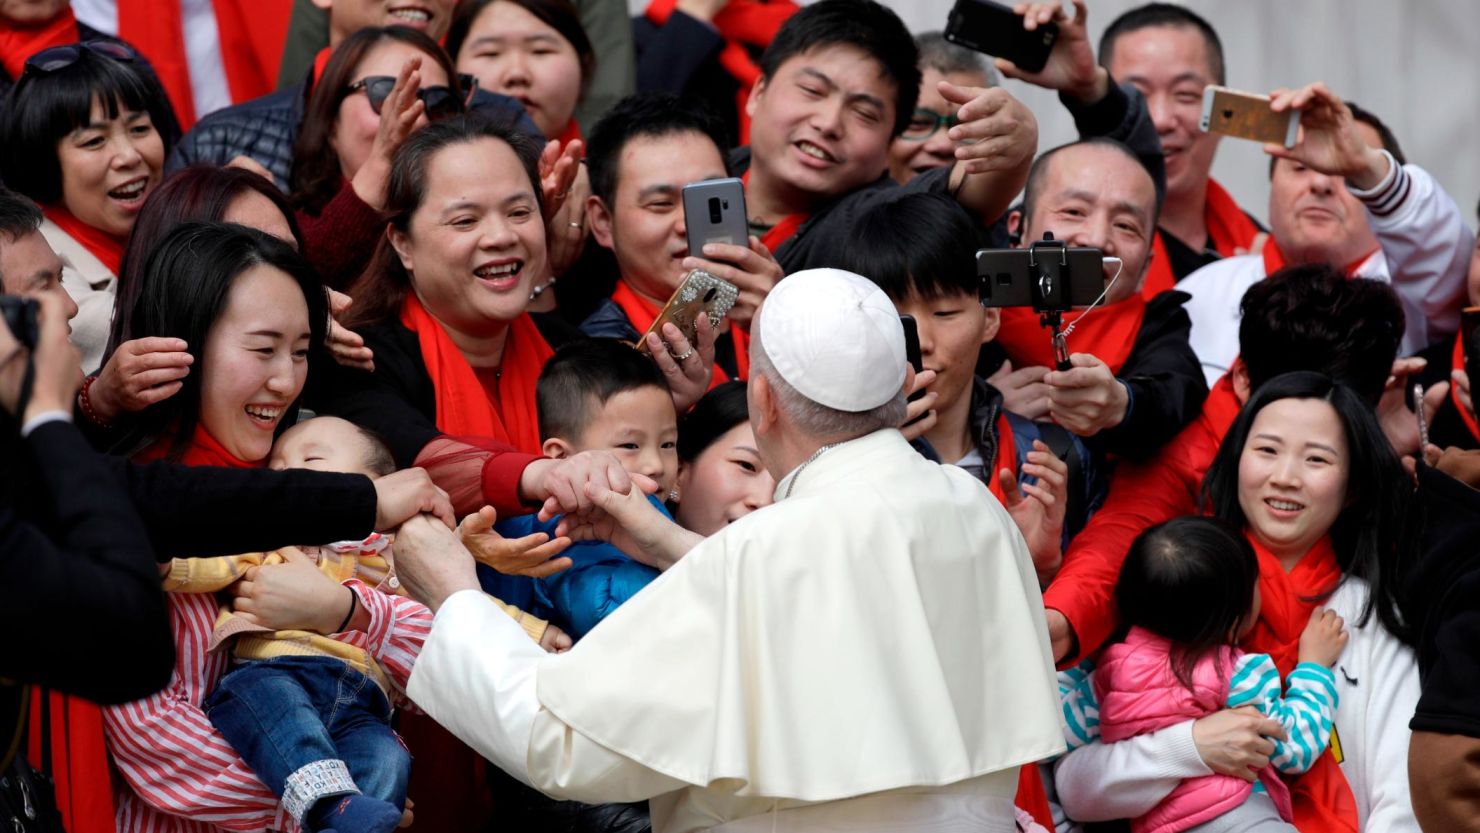 Pope Francis meets a group of faithful from China at the end of his weekly general audience in St. Peter's Square, at the Vatican on April 18.